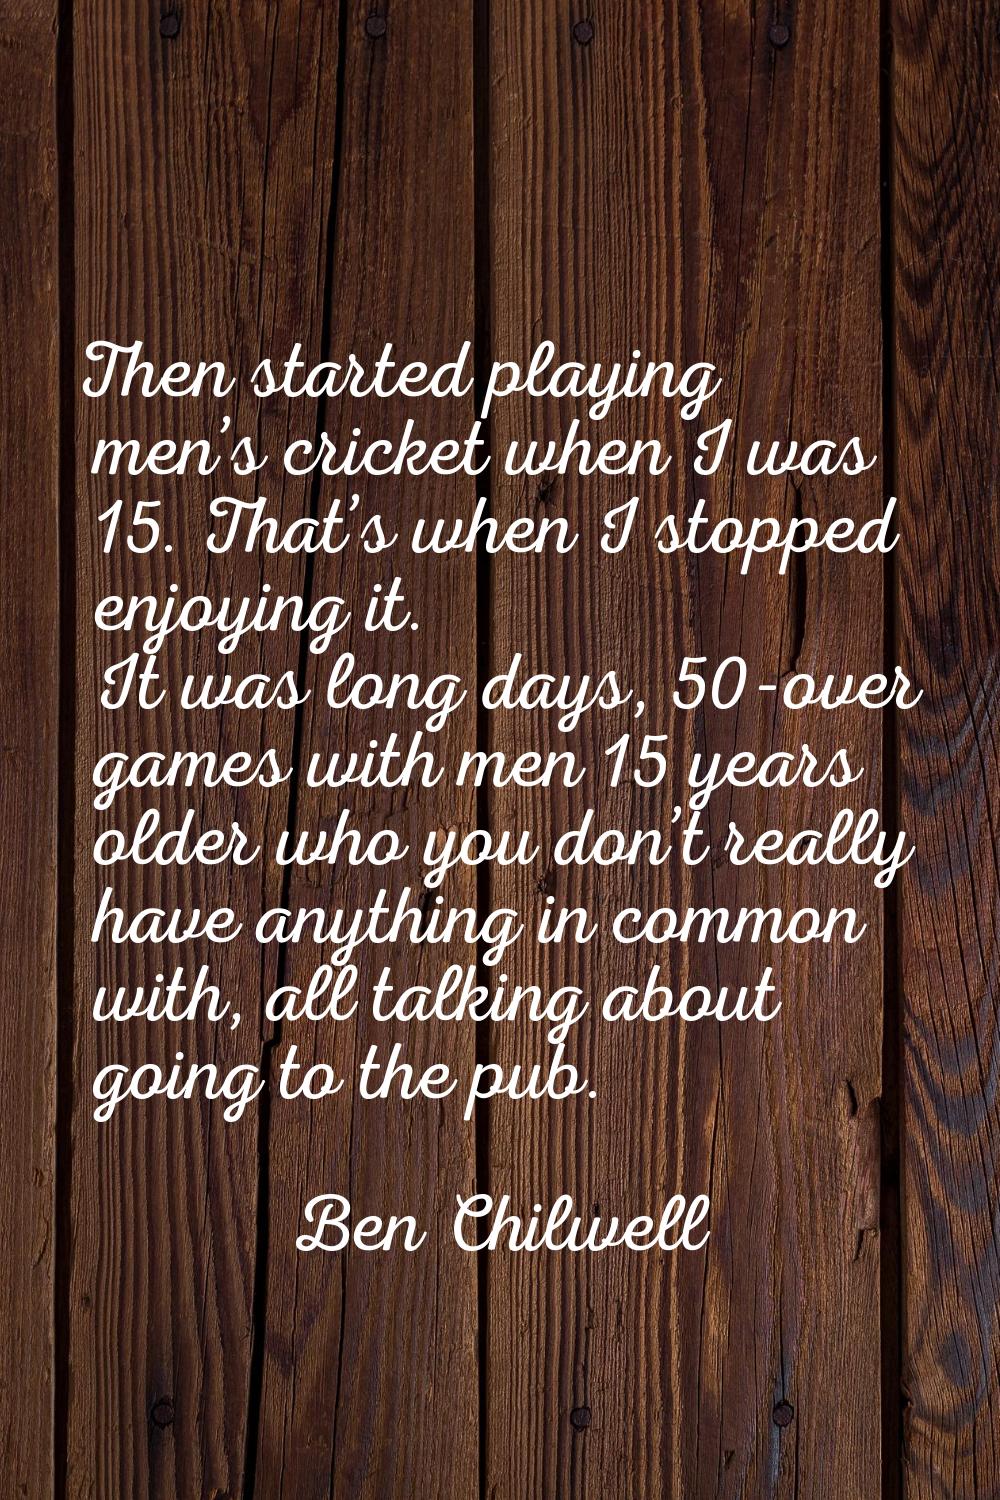 Then started playing men’s cricket when I was 15. That’s when I stopped enjoying it. It was long da